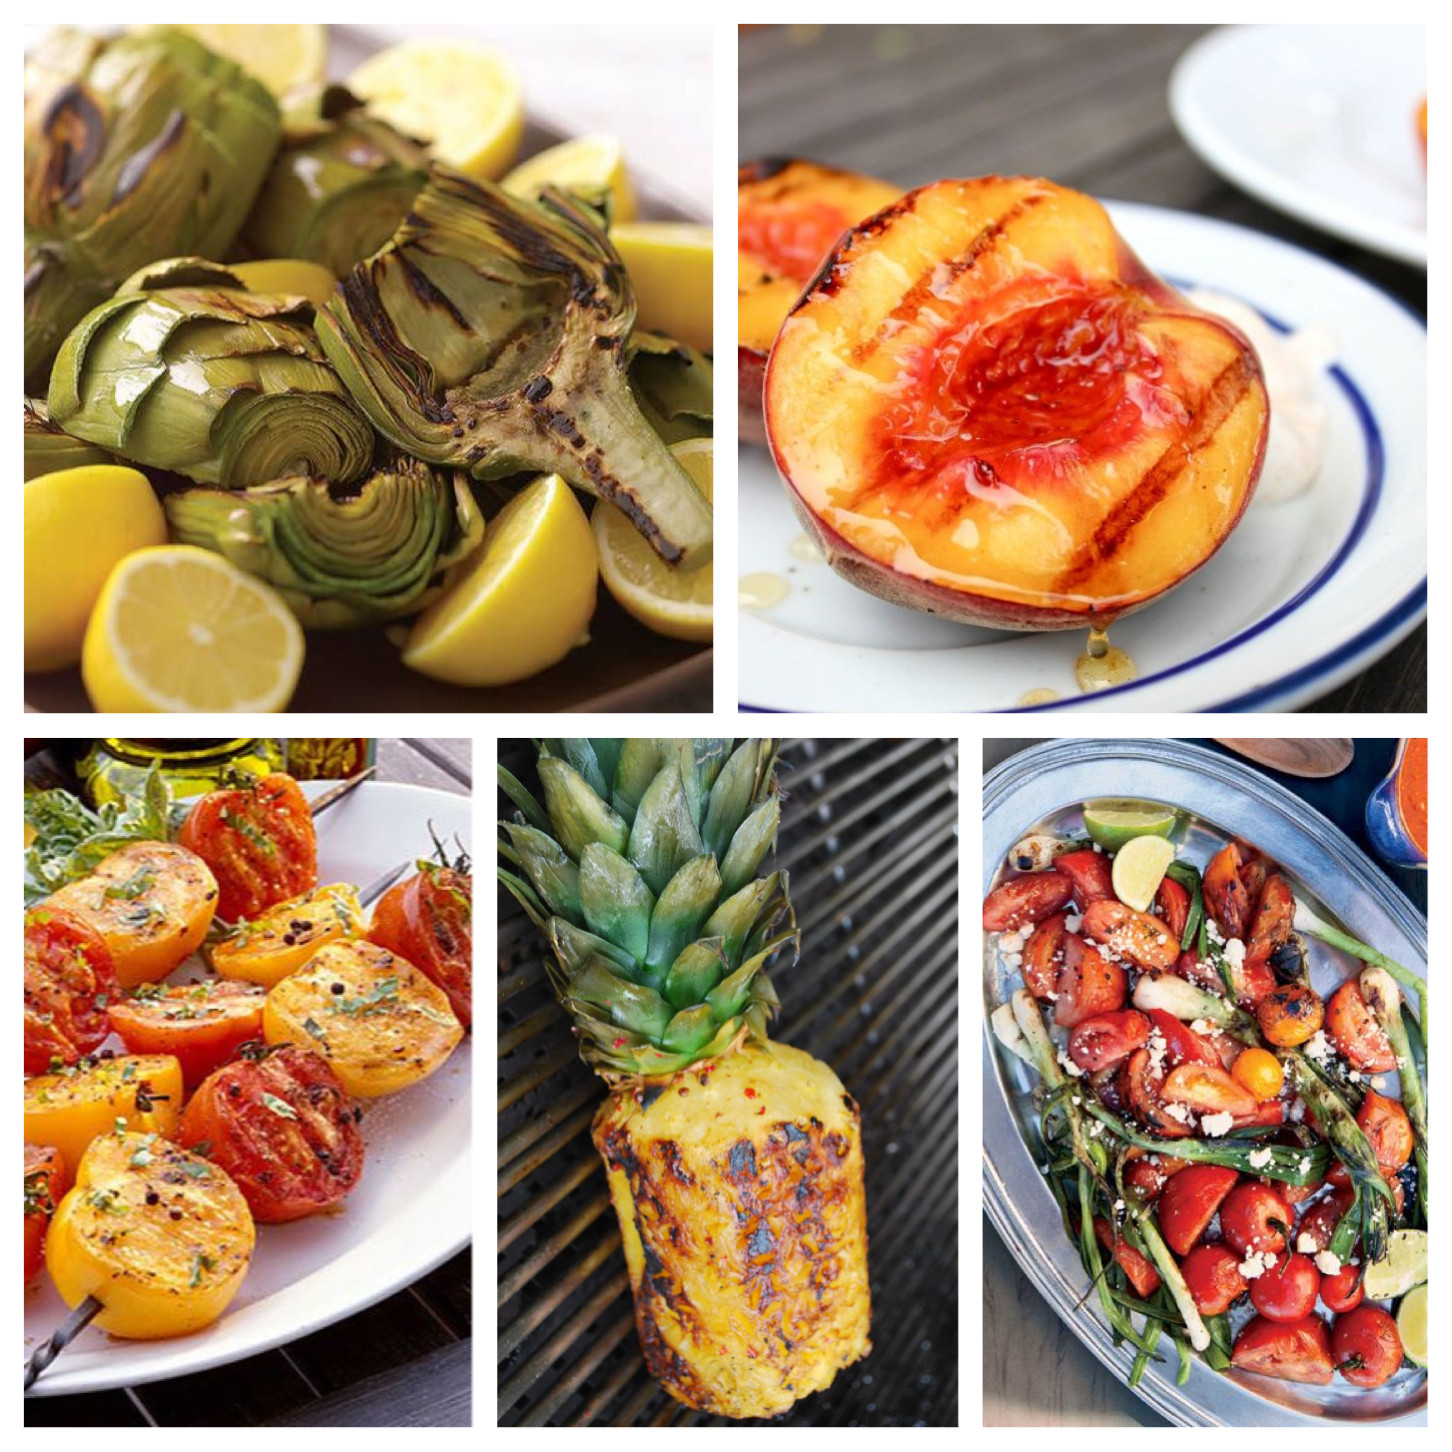 Fathers Day Dinner Ideas
 10 Grilling Recipes For a Delicious Father’s Day Dinner